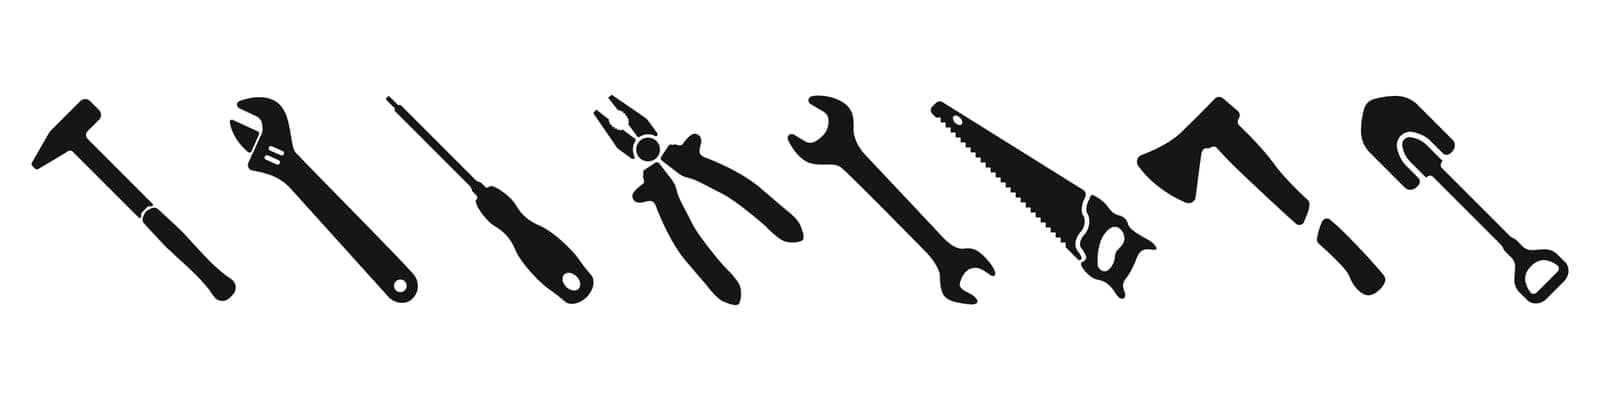 Black work tools vector icon set. Tools vector icon. A collection of tools for repair, restoration, installation, construction. Pliers, gas wrench, screwdriver, hammer, key, shovel, ax, saw. by Moreidea